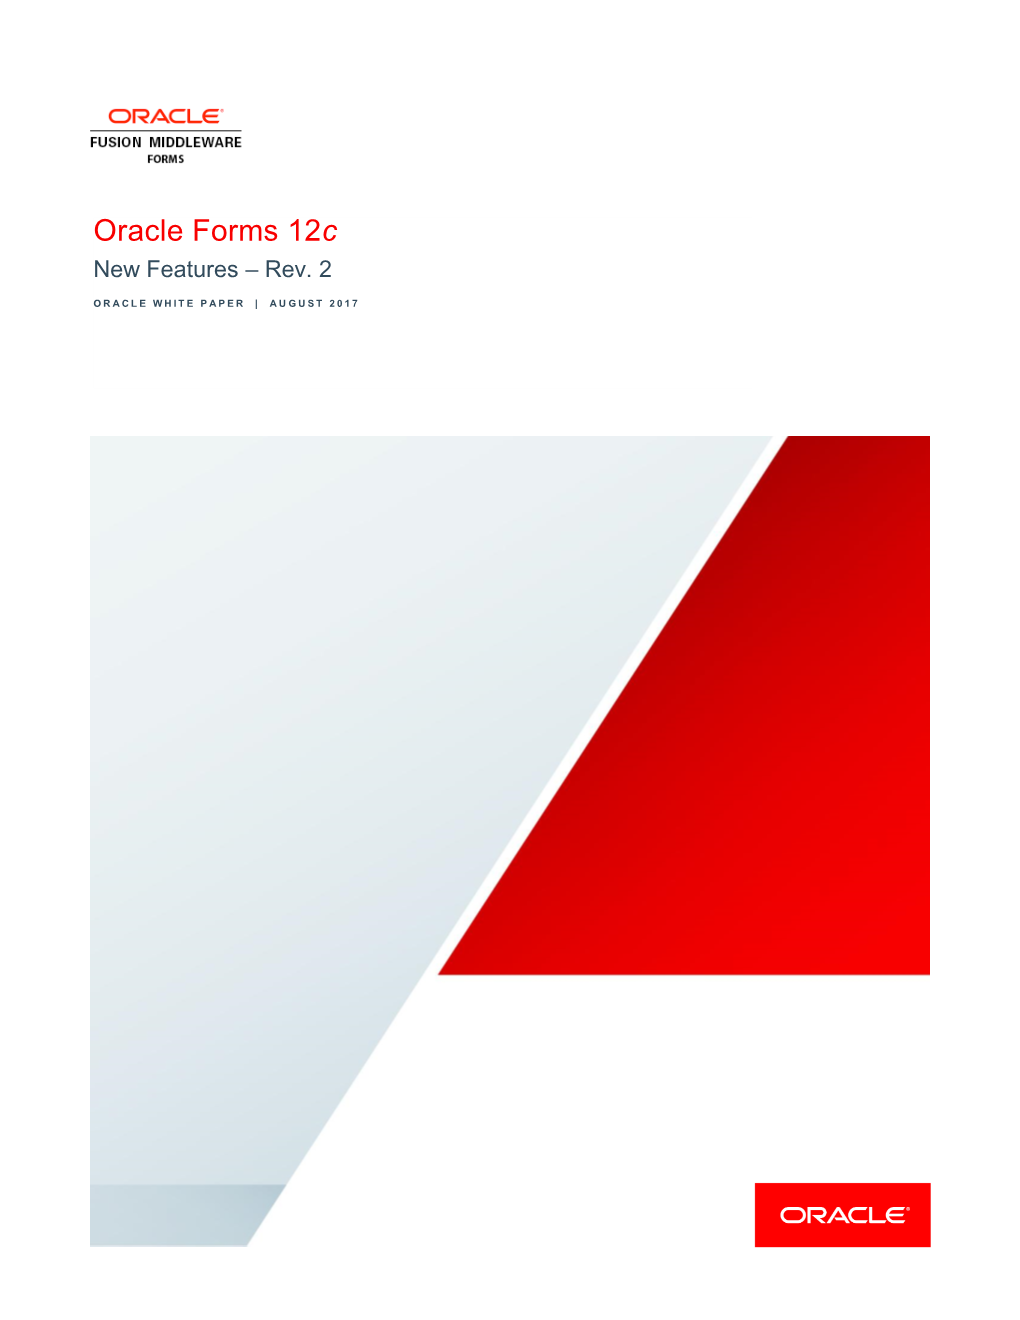 Oracle Forms 12C New Features – Rev